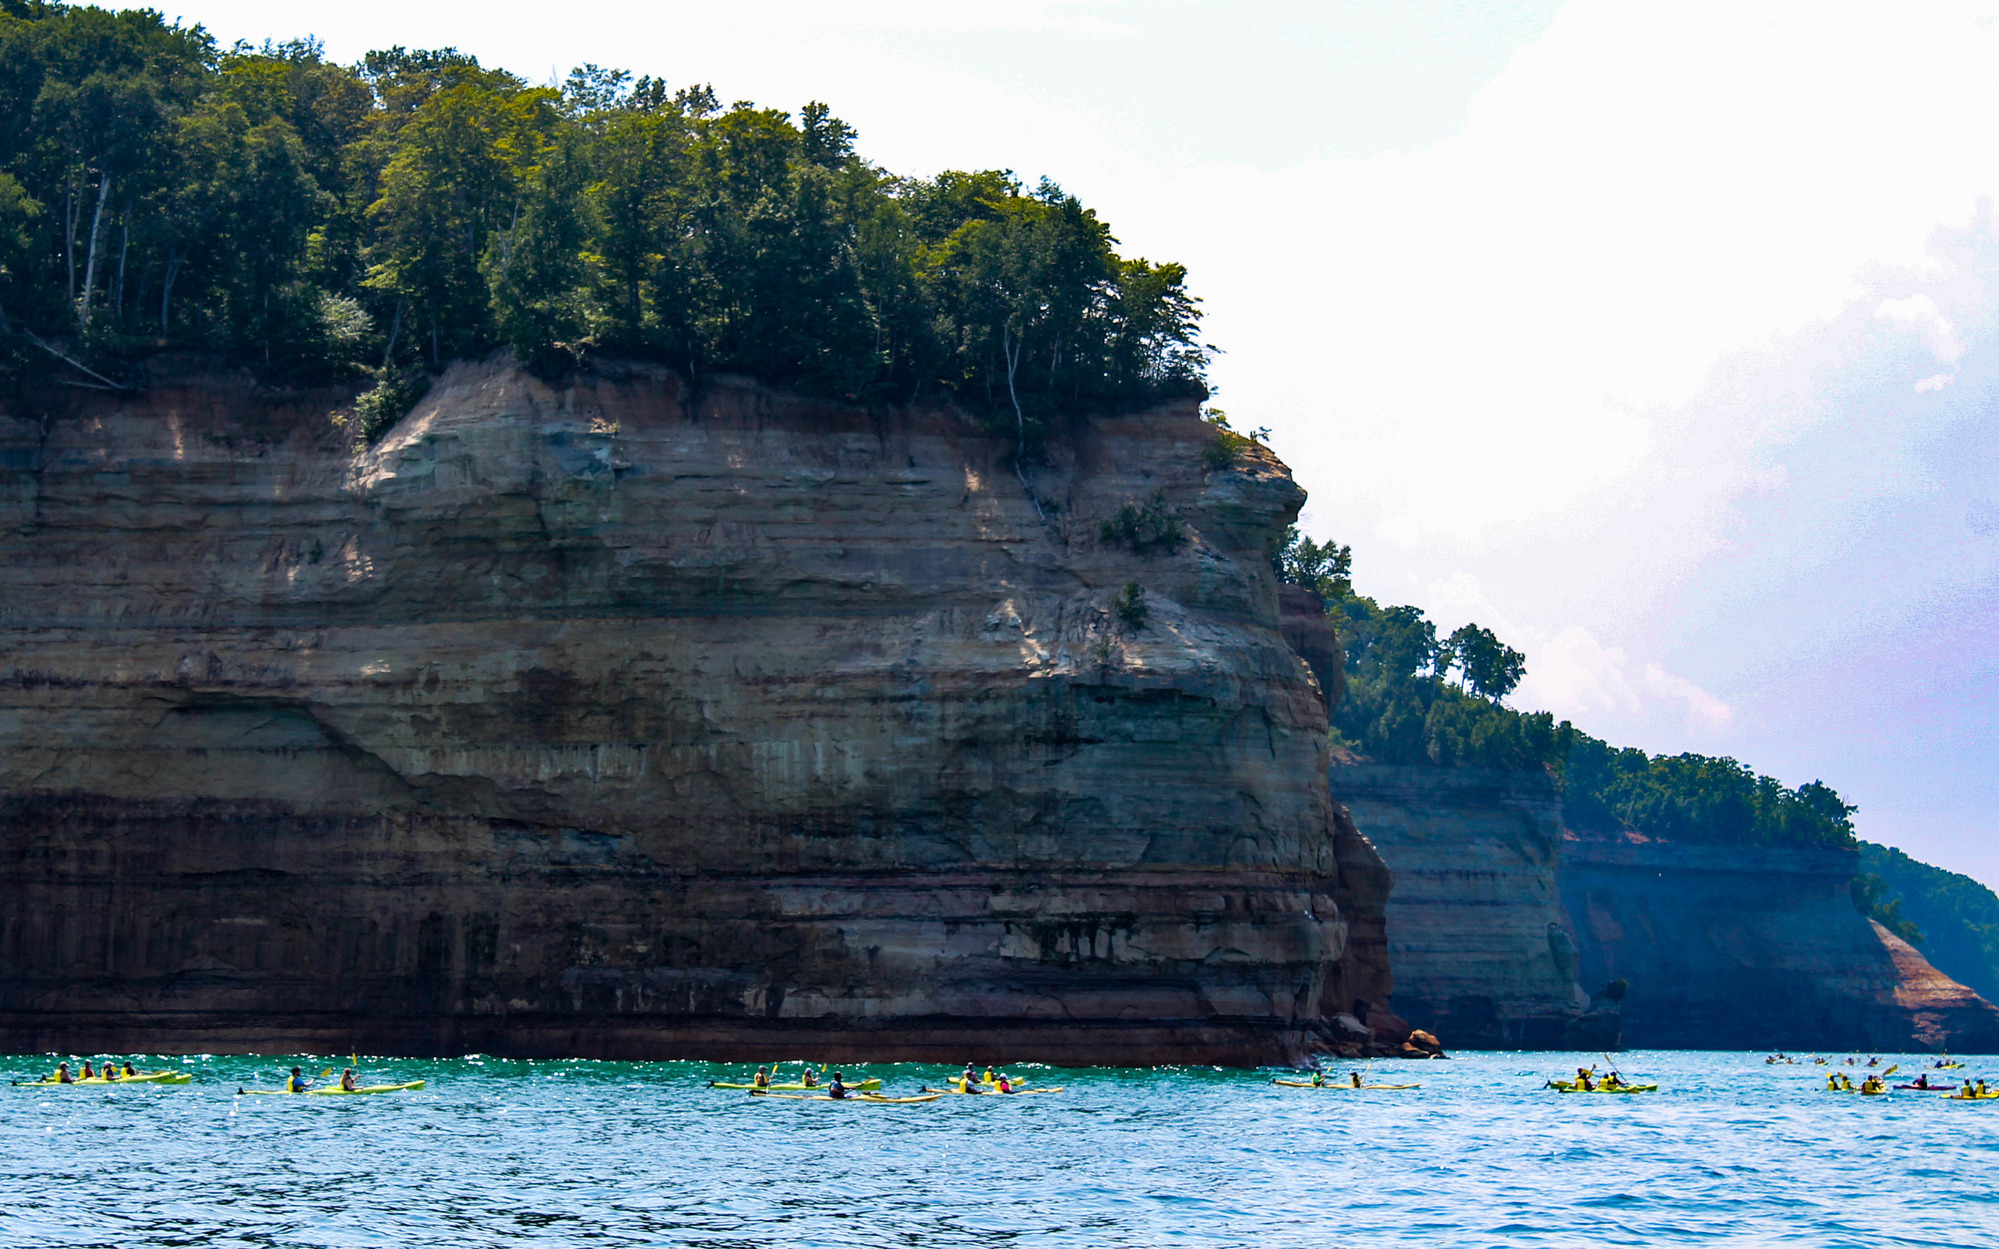 Kayakers near a long cliff face in a lake